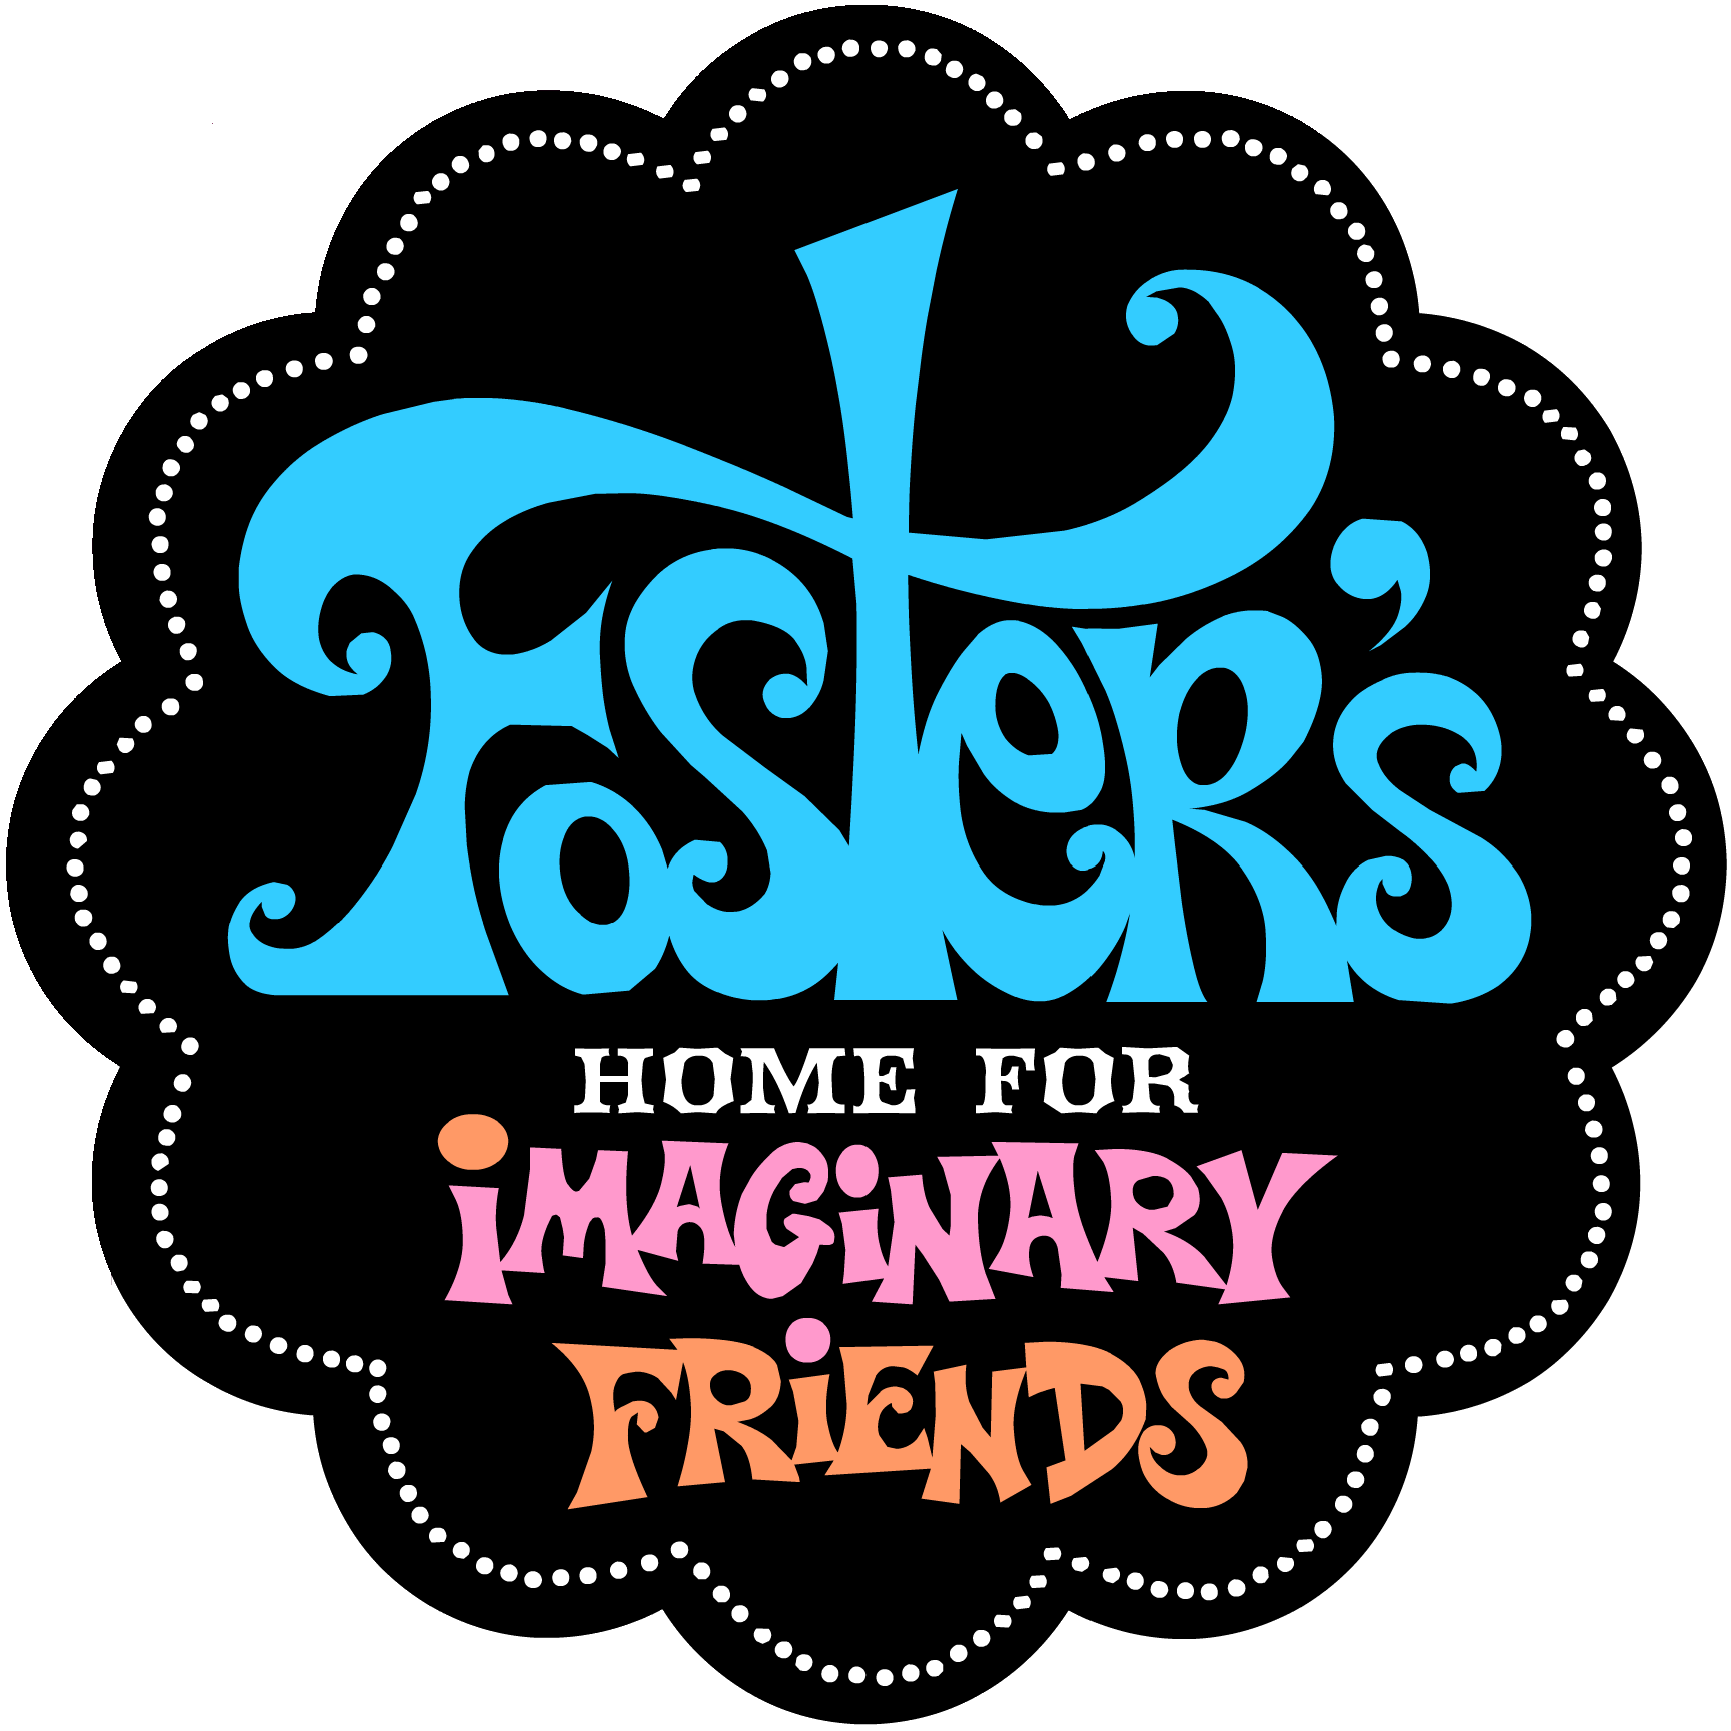 fresh prince of bel air font fosters home for imaginary friends movie